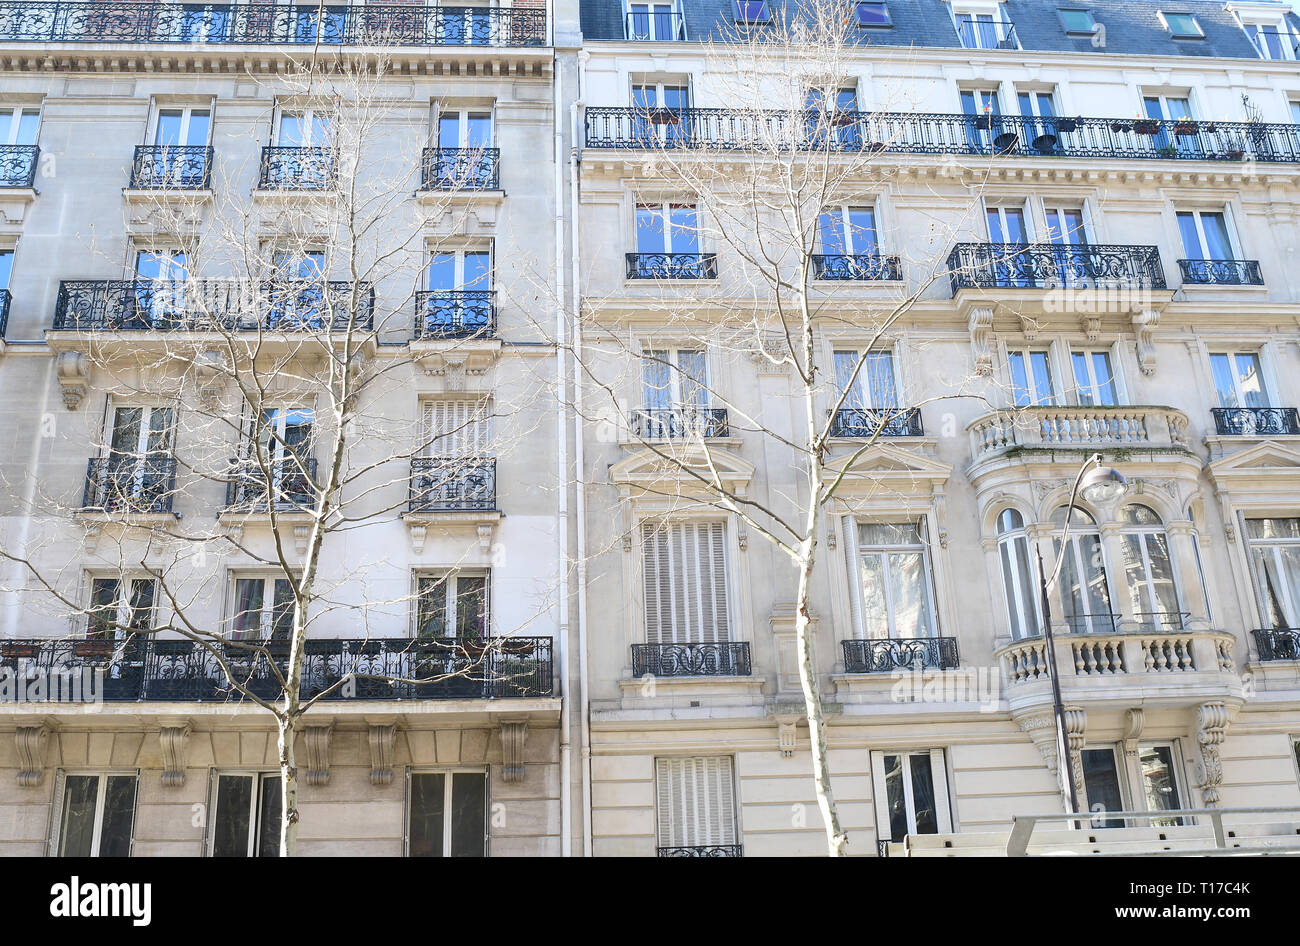 PARIS-FRANCE-FEB 24, 2019: The architecture of Paris has preserved the look and feel of many of its historic neighborhoods and streets, even though it Stock Photo